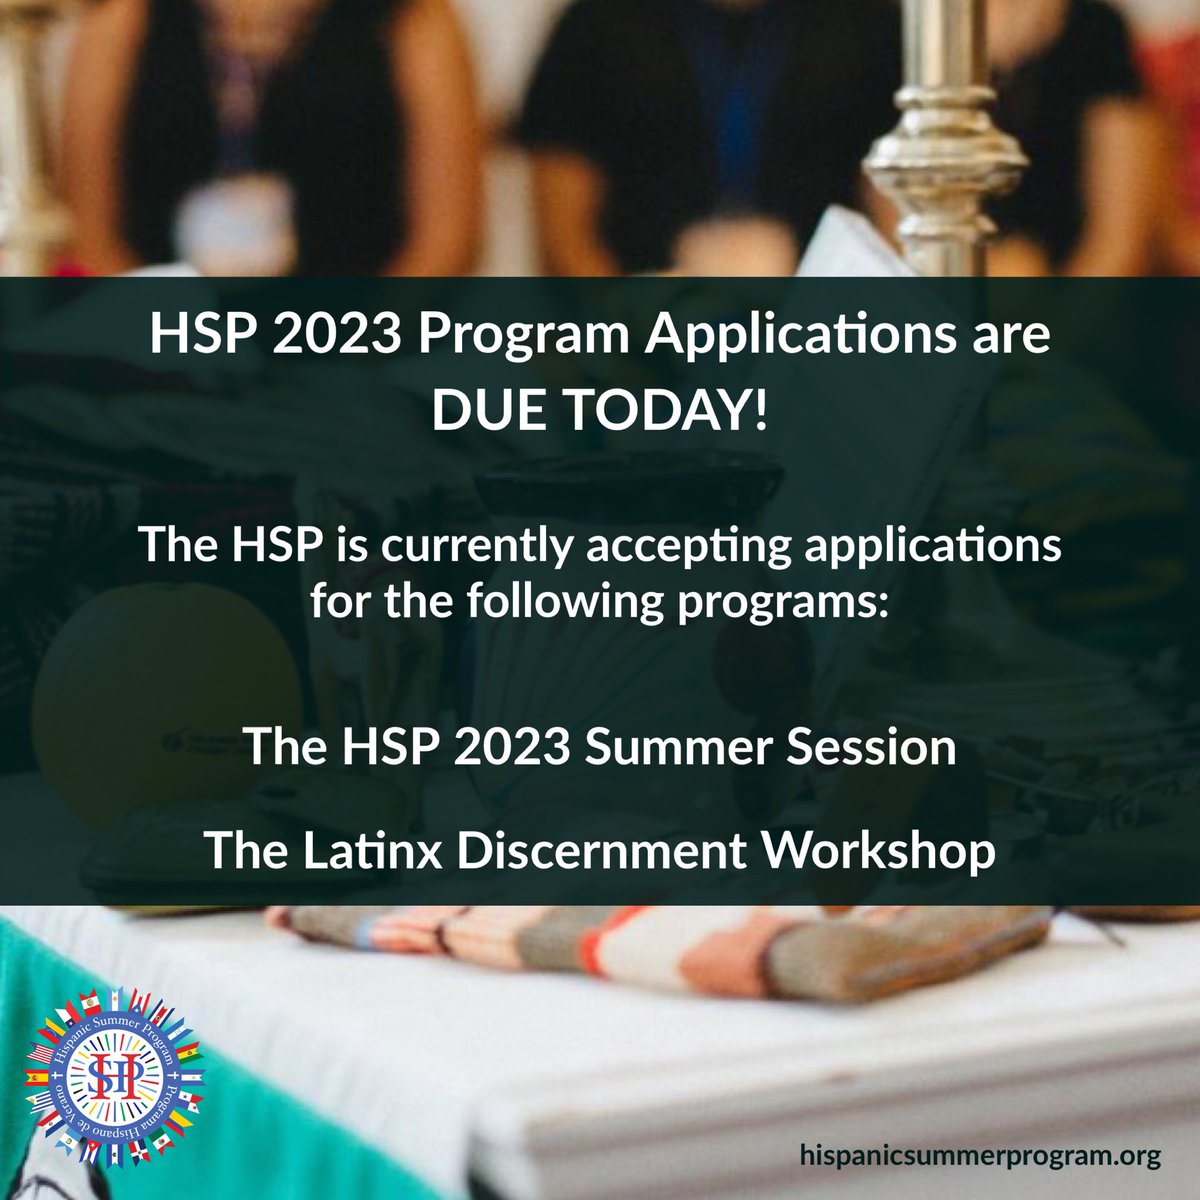 Hsp 2023 program applications are due on today! The hsp is currently accepting a...